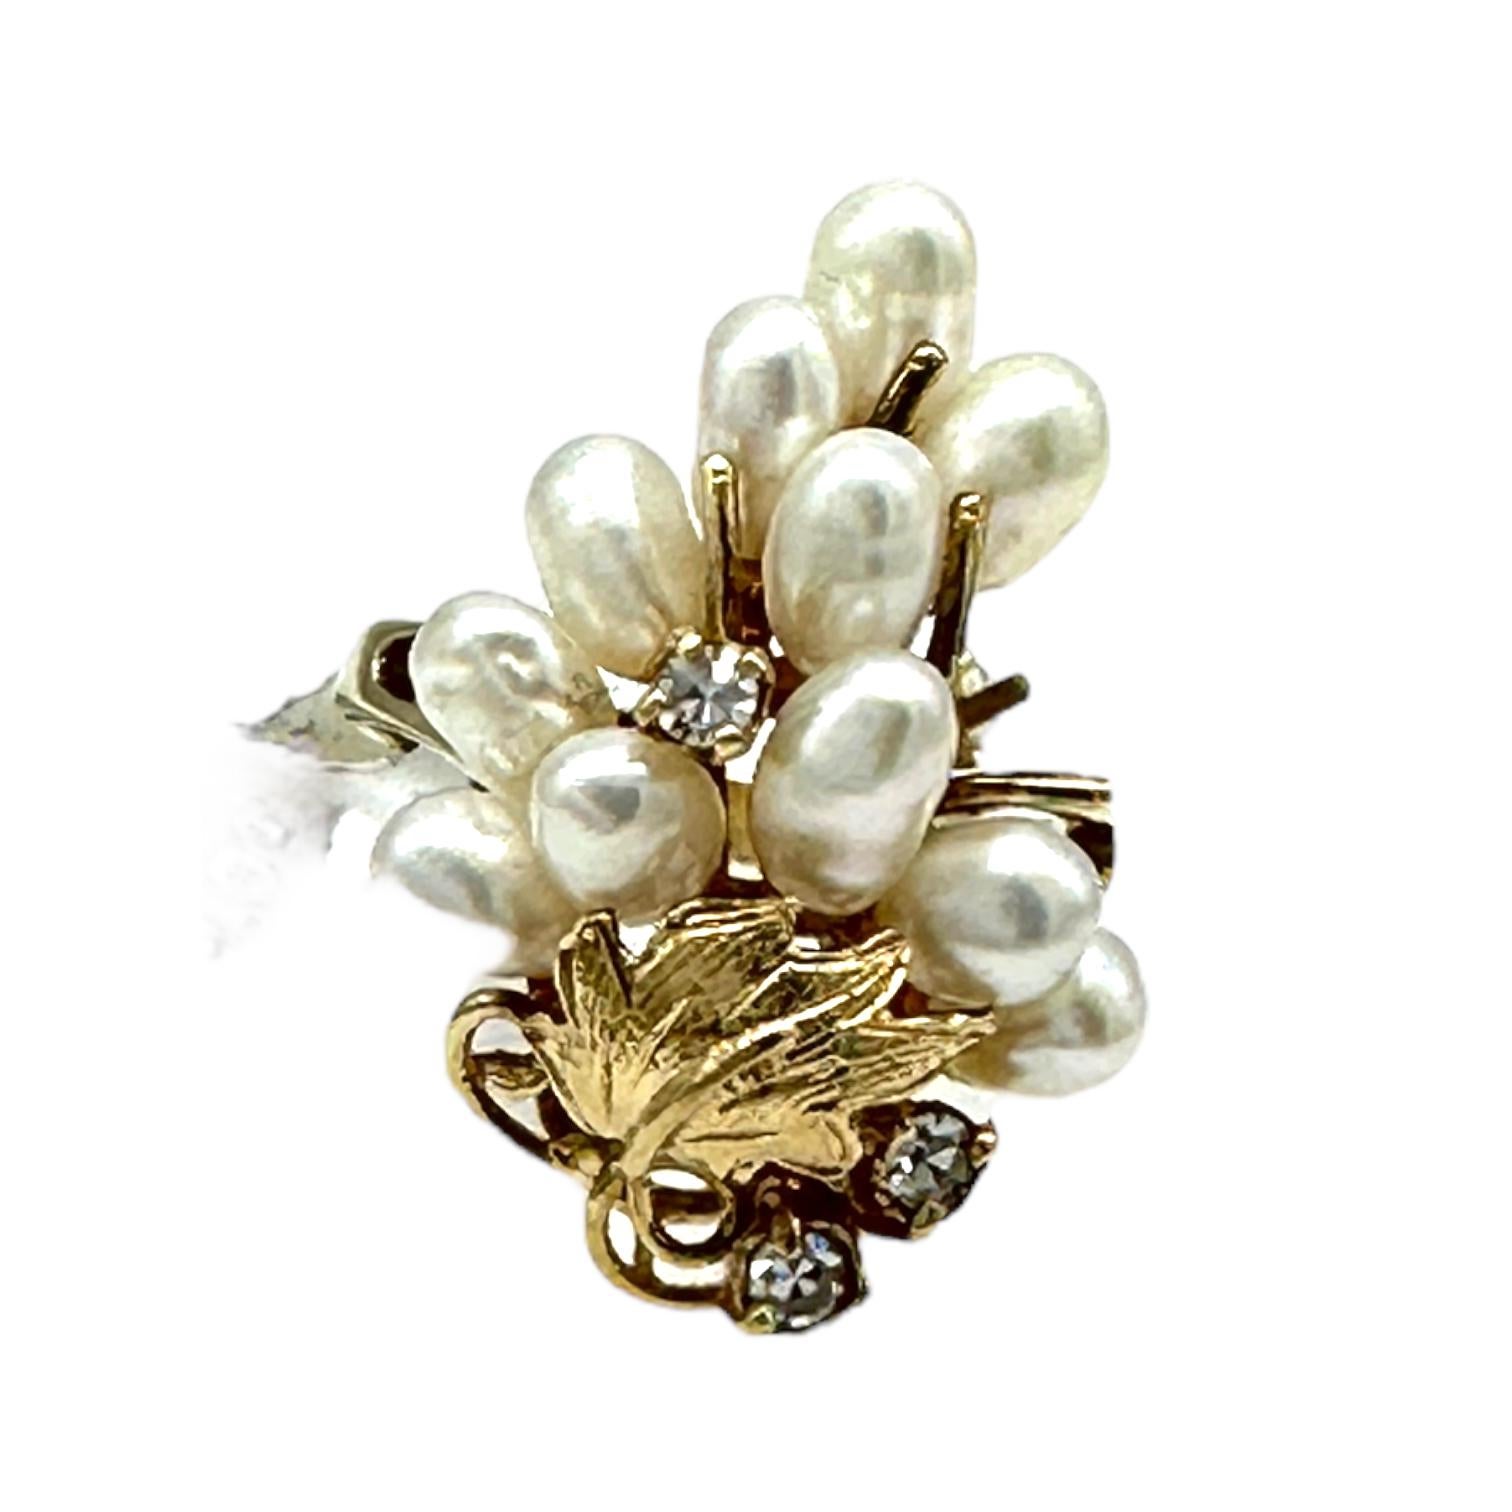 14-karat yellow gold pearl ring measures 23 x 16 mm wide and consists of three diamonds and freshwater pearls. The ring size is 5. The weight of gold is 4 grams. Three diamonds have a weight of .10 carats.
This necklace features a stunning cluster